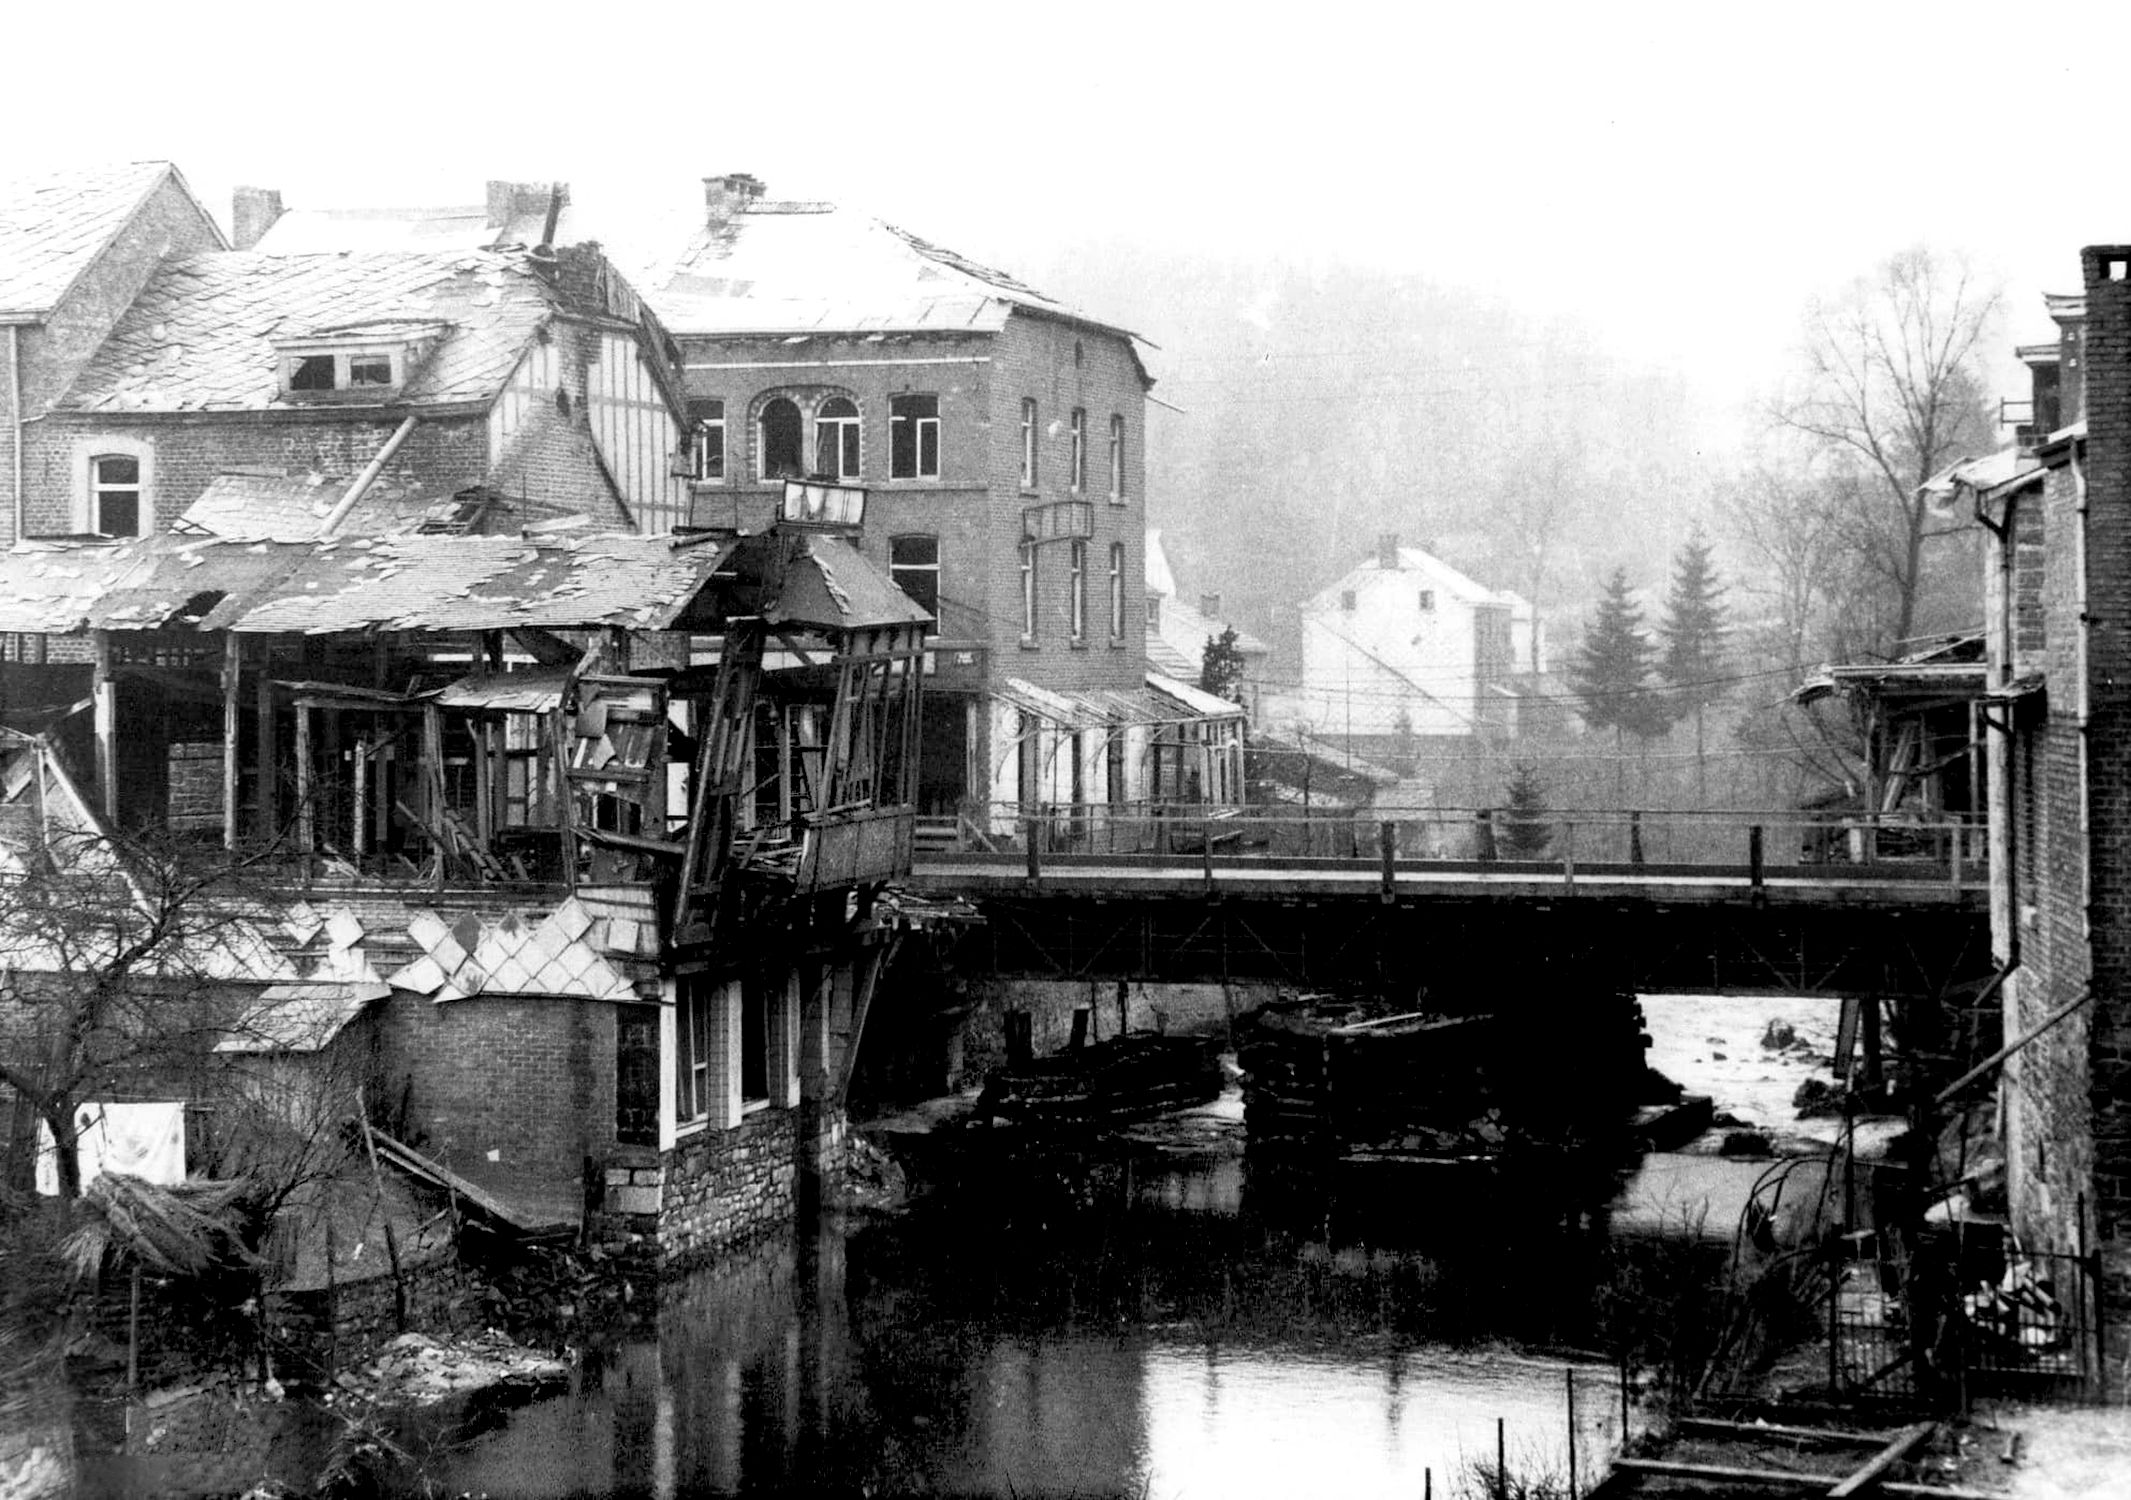 American engineers at Trois-Ponts destroyed the bridges over the Salm and Ambleve Rivers as they stood up to German armor and infantry of Kampfgruppe Peiper during the Battle of the Bulge. Fighting raged at Trois-Ponts as the engineers displayed great valor against Lieutenant Colonel Joachim Peiper’s tanks and troops at the critical juncture.